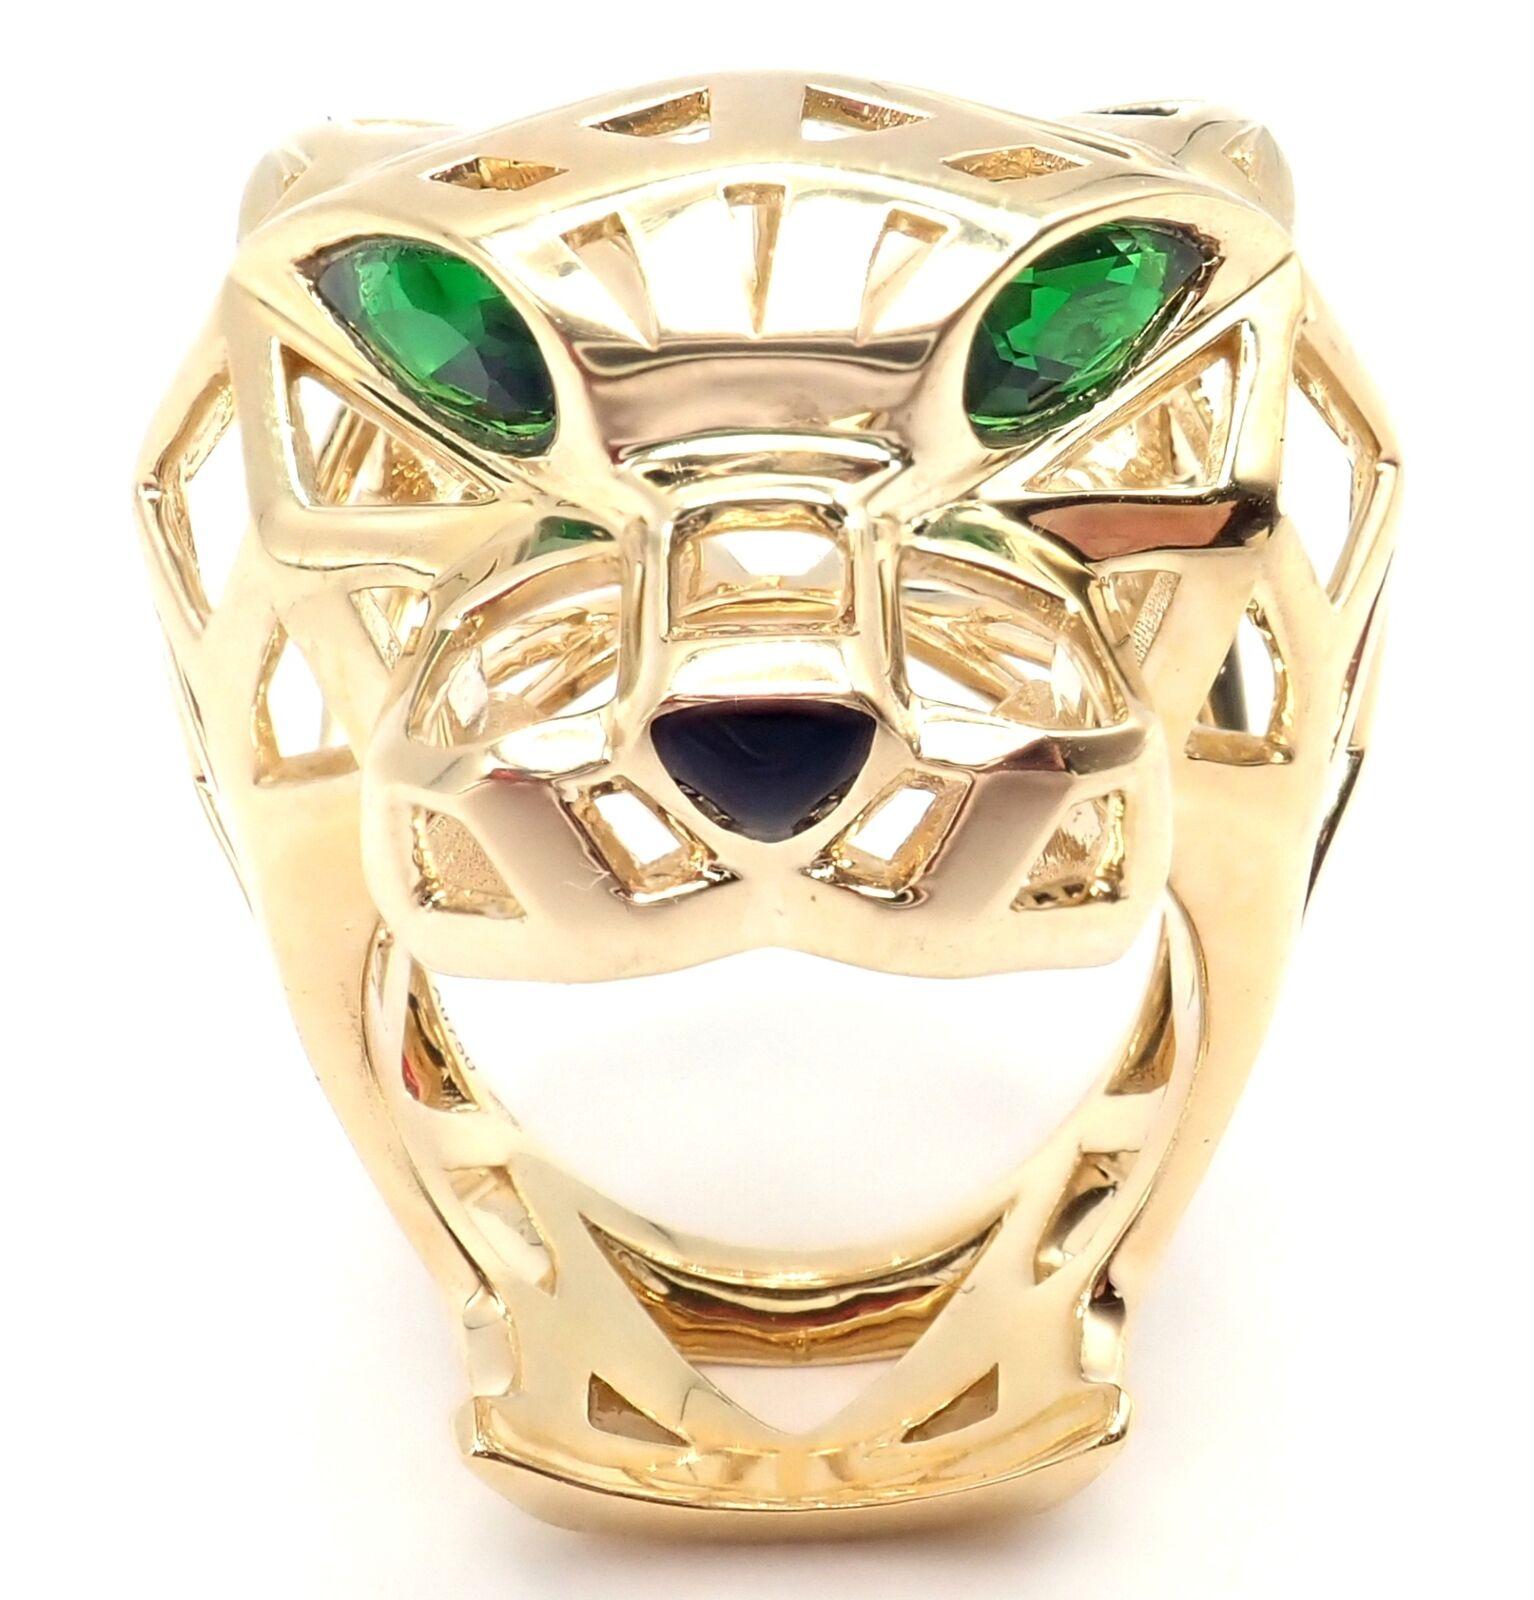 18k Yellow Gold Panther Tsavorite, Onyx Large Ring by Cartier. 
From Cartier's 